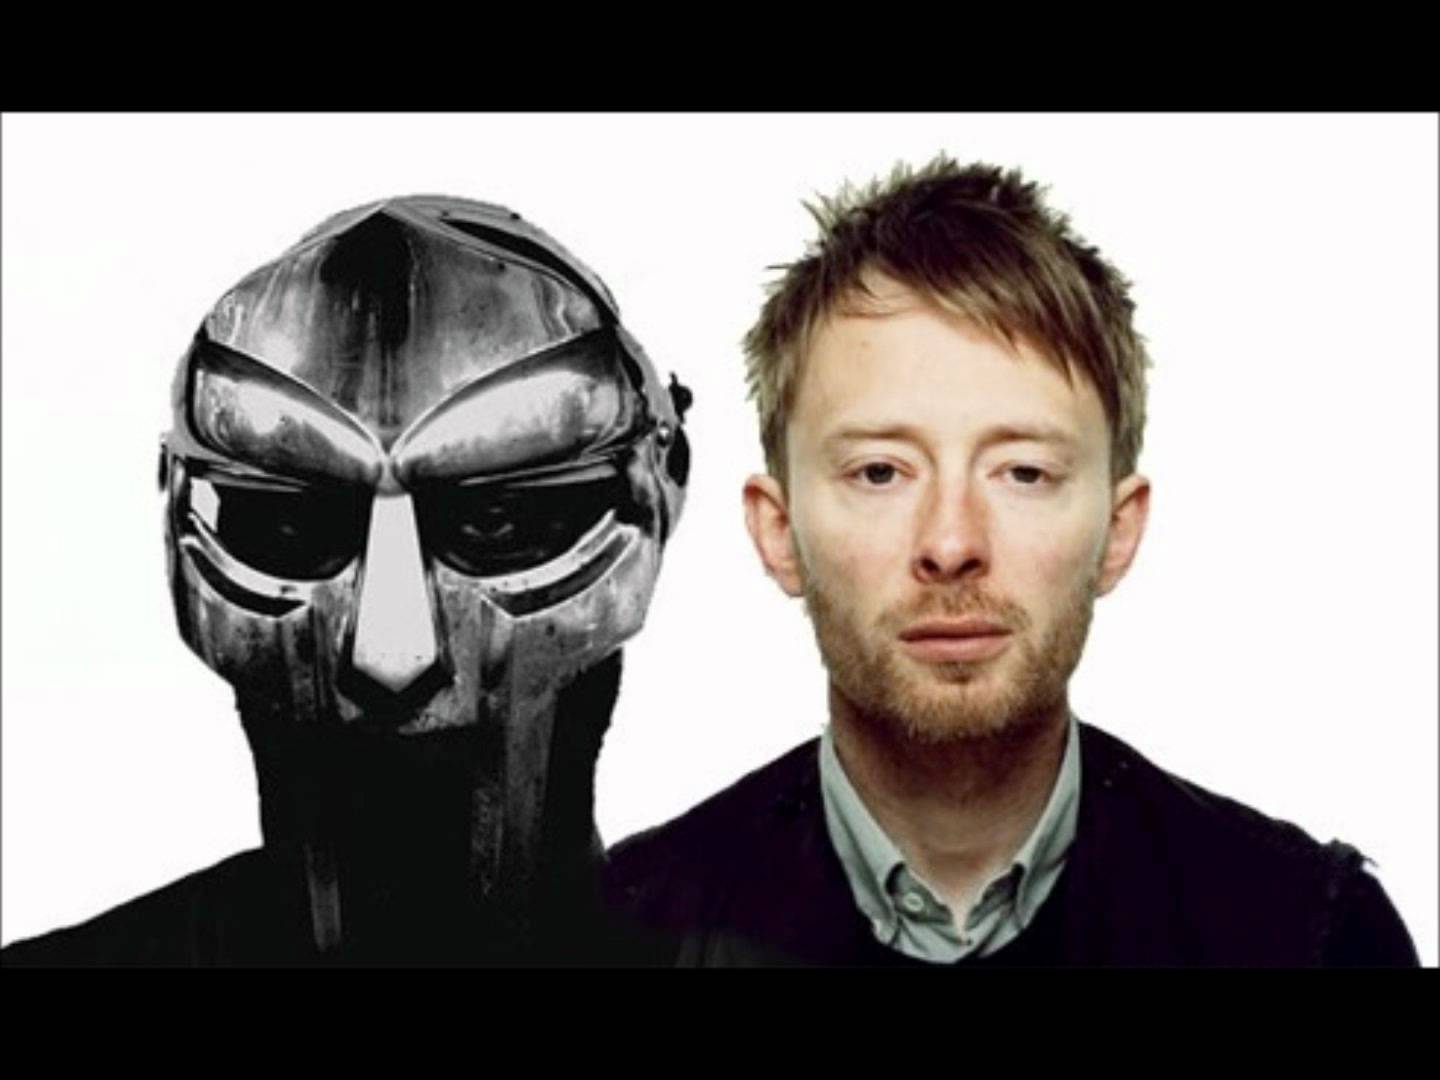 Thom Yorke Backgrounds, Compatible - PC, Mobile, Gadgets| 1440x1080 px